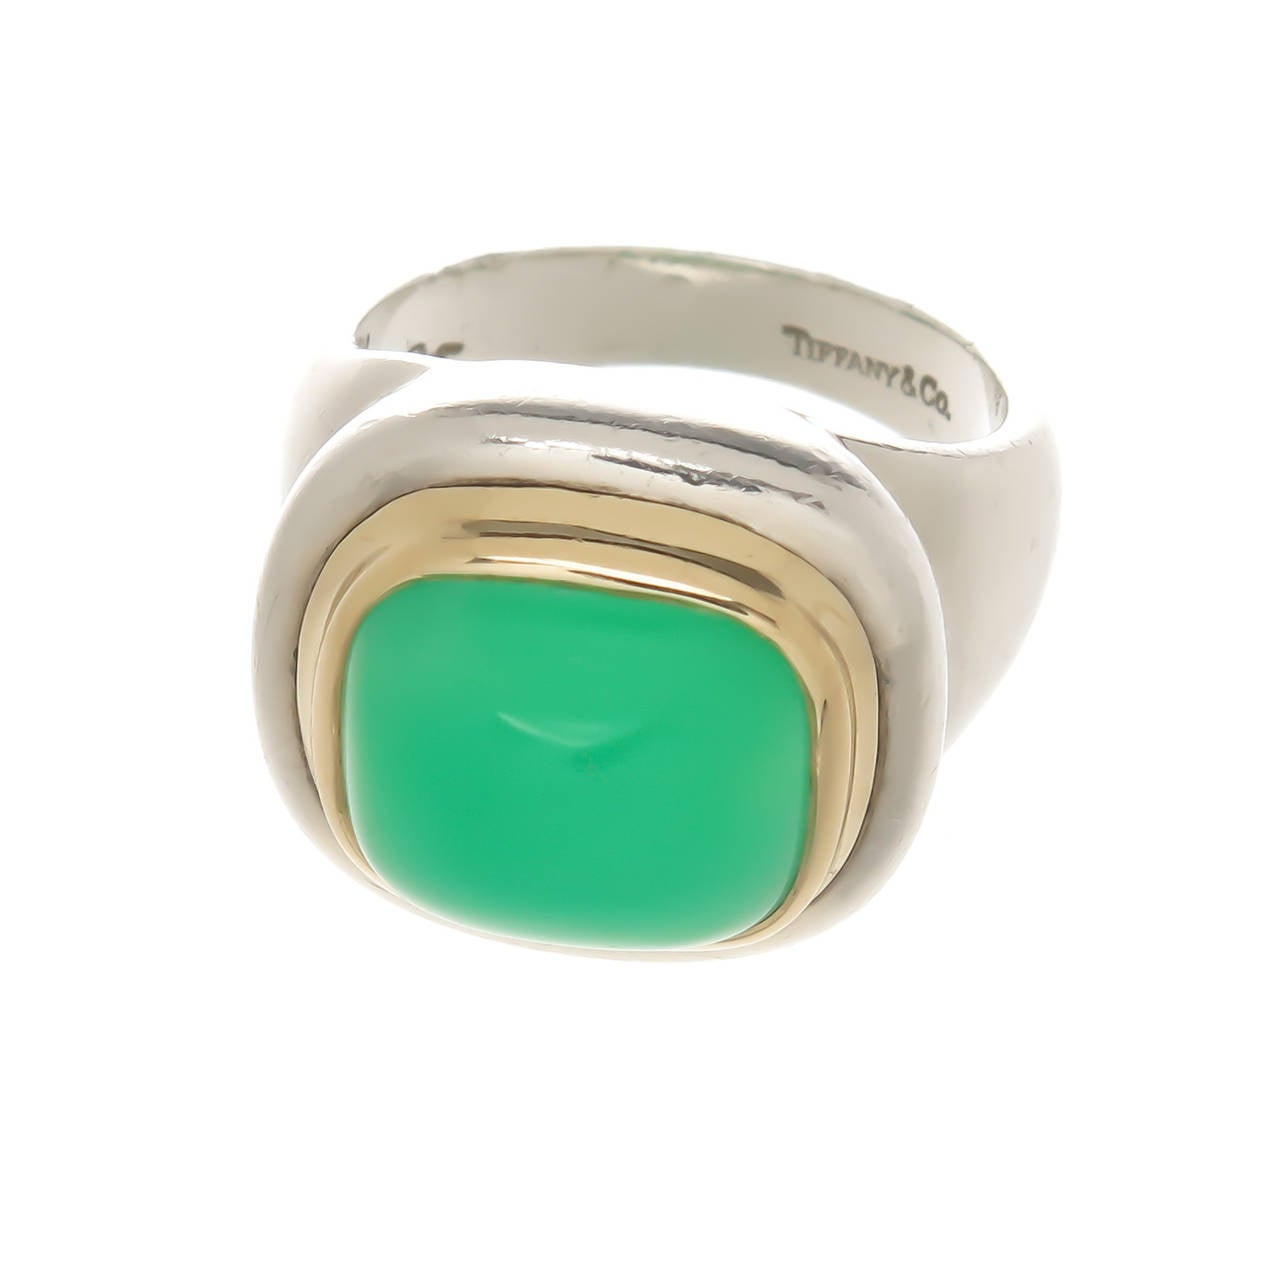 Circa 1980 Paloma Picasso for Tiffany & Company Sterling silver, 14K Yellow Gold ring set with a domed Green Chrysophrase . Top measuring 3/4 inch  X  5/8 inch. Finger size = 6